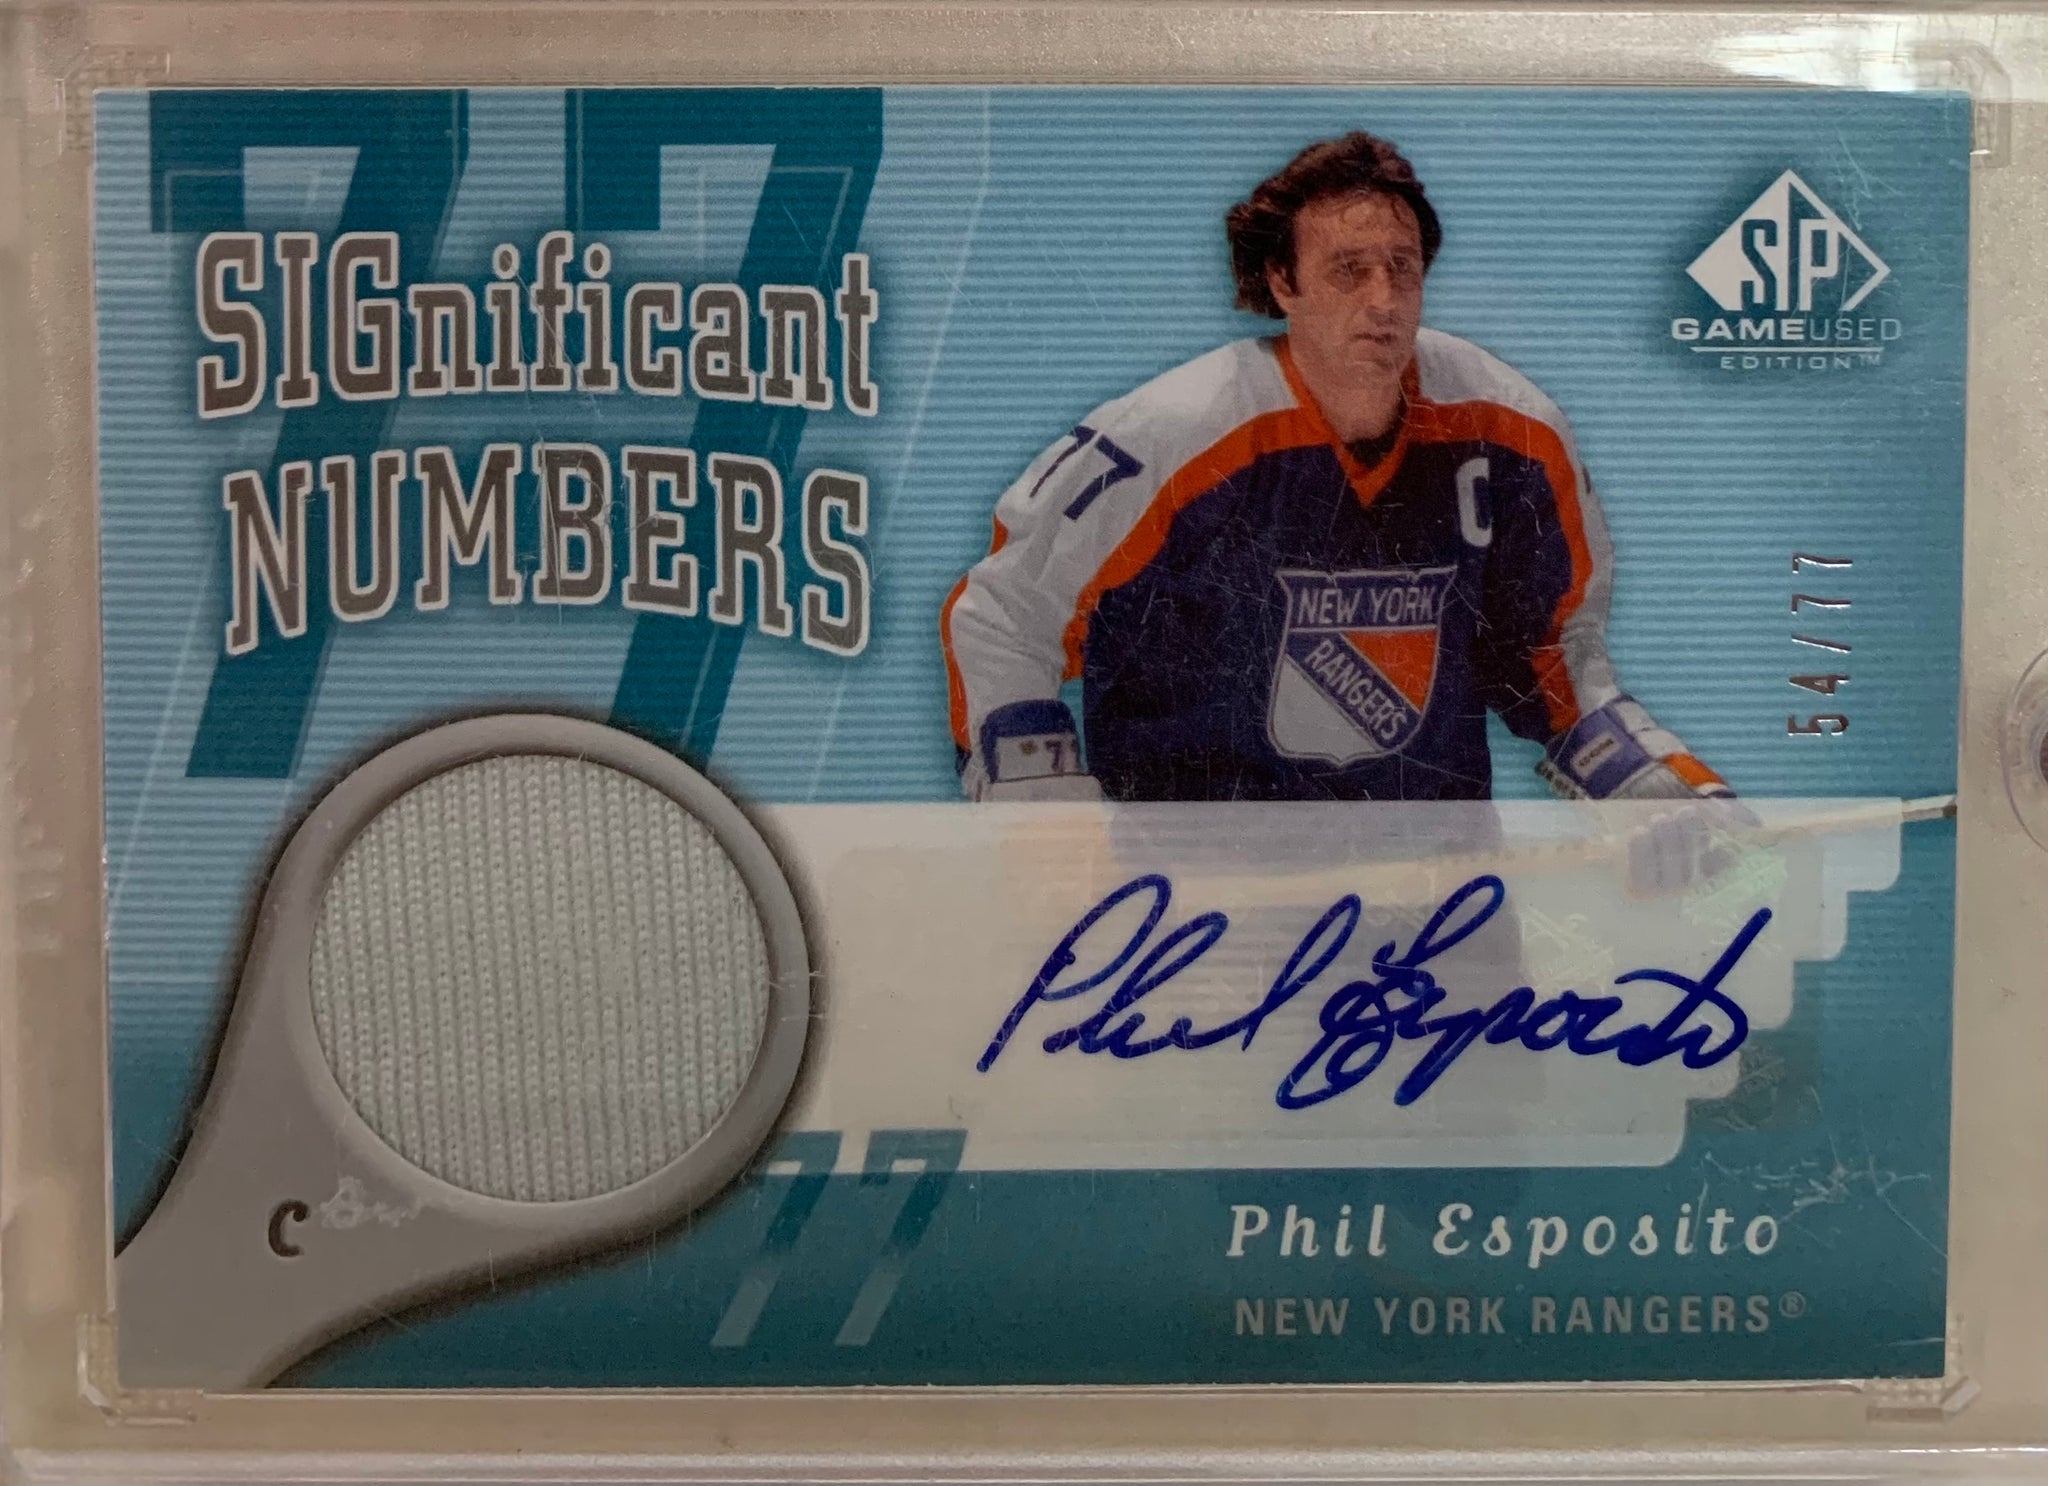 2005-06 SP GAME USED HOCKEY #SN-PE NEW YORK RANGERS - PHIL ESPOSITO SIGNIFICANT NUMBERS AUTO CARD RAW